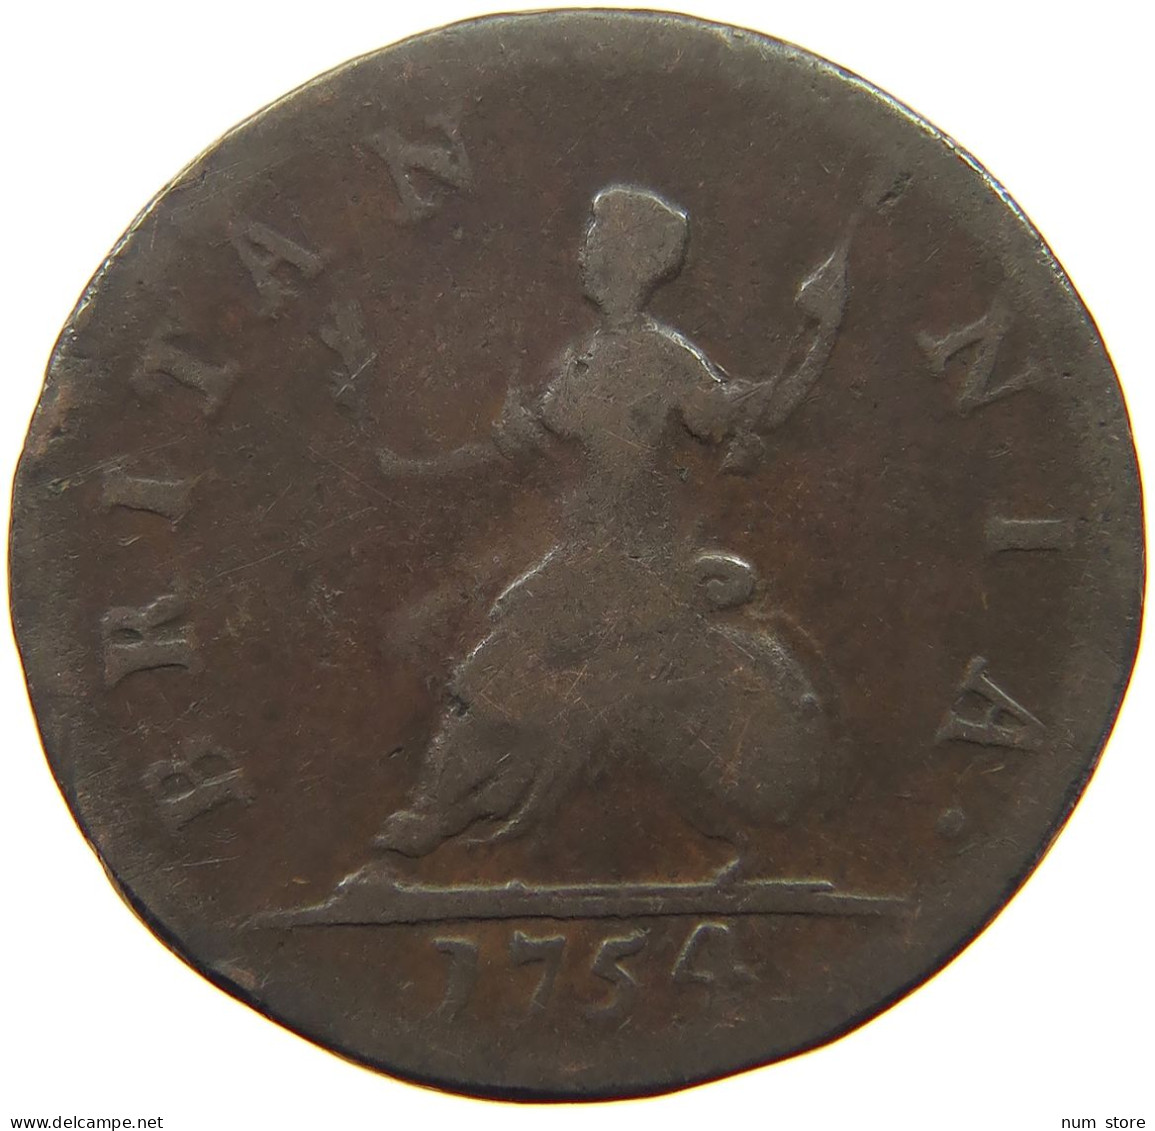 GREAT BRITAIN FARTHING 1754 George II. 1727-1760. #a002 0467 - A. 1 Farthing